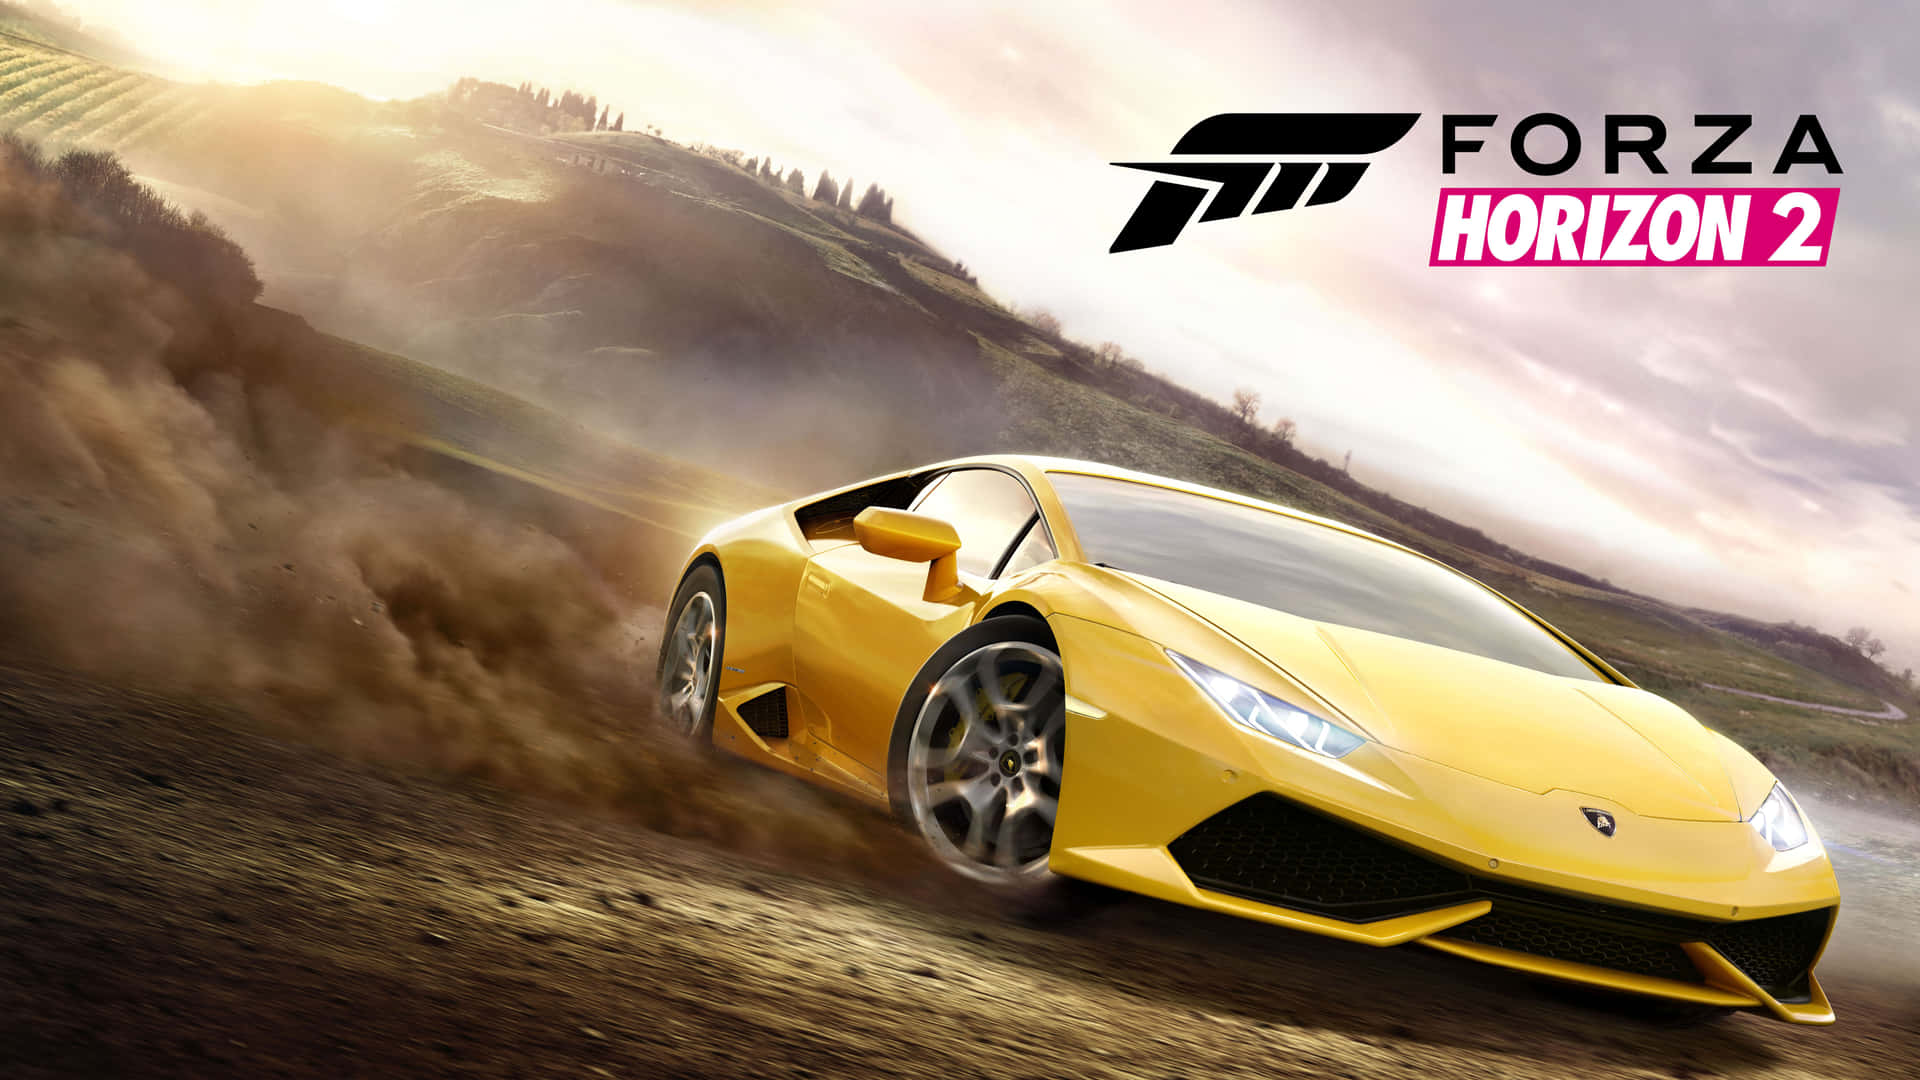 Prove your skills behind the wheel of some of the world's most iconic cars in Forza Wallpaper